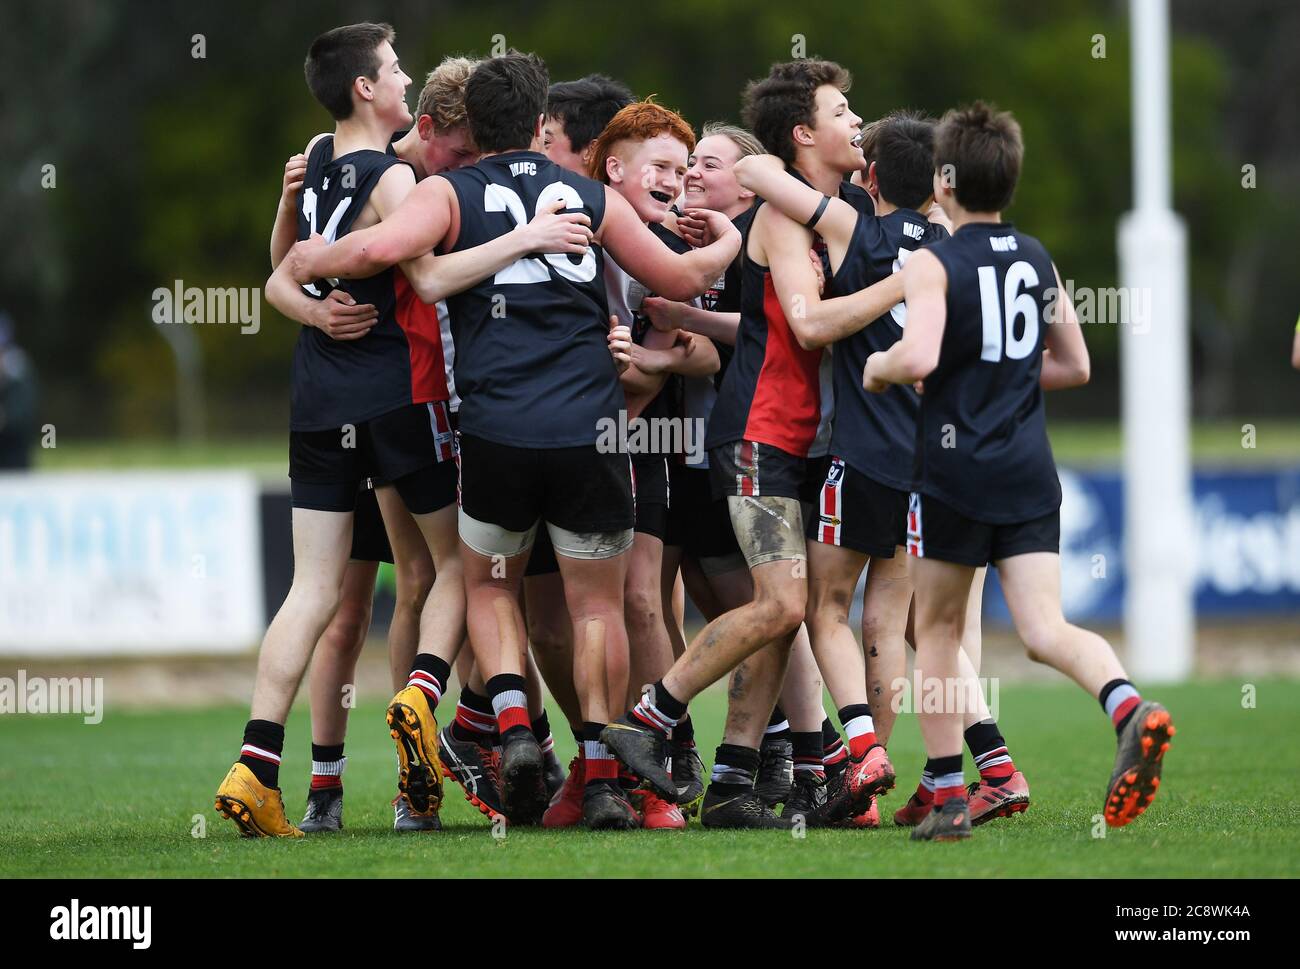 Myrtleford Saints' celebrate their triumph over the Wangaratta Imperials following a grass roots regional football final in North East Victoria, Austr Stock Photo